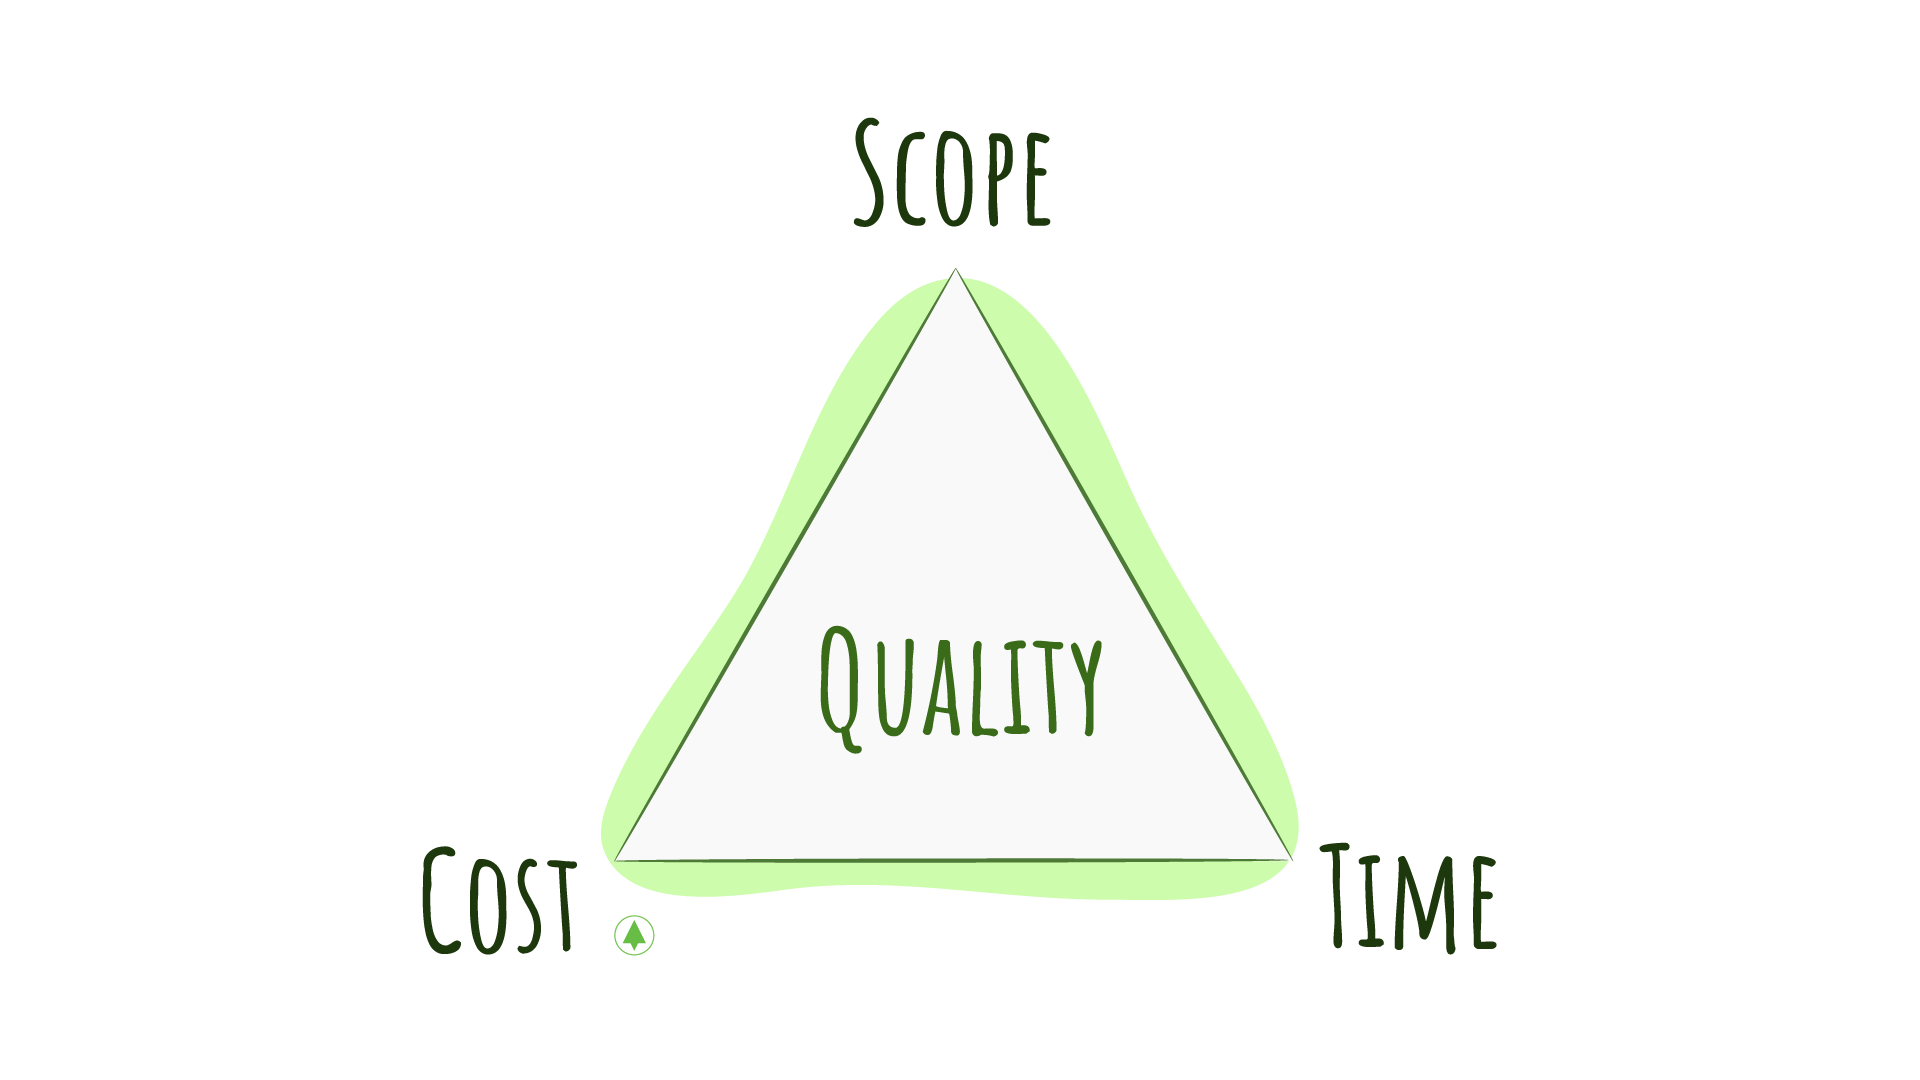 Iron triangle: Cost, Scope and Time in the edges; Quality in the center